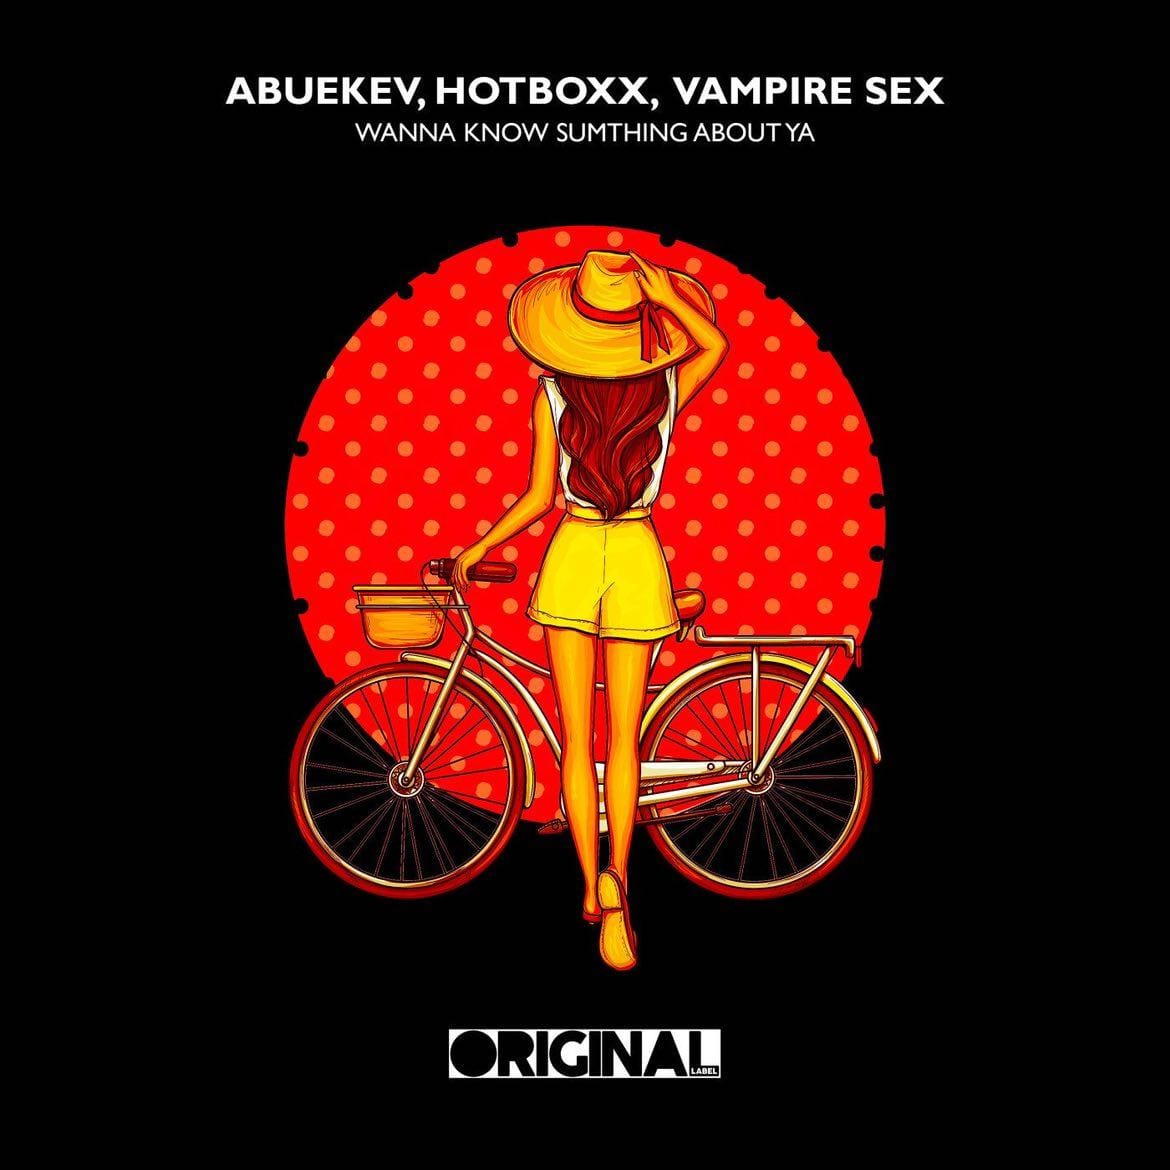 AbueKev, Hotboxx, Vampire Sex, Wanna Know Sumthin About Ya, Original Label